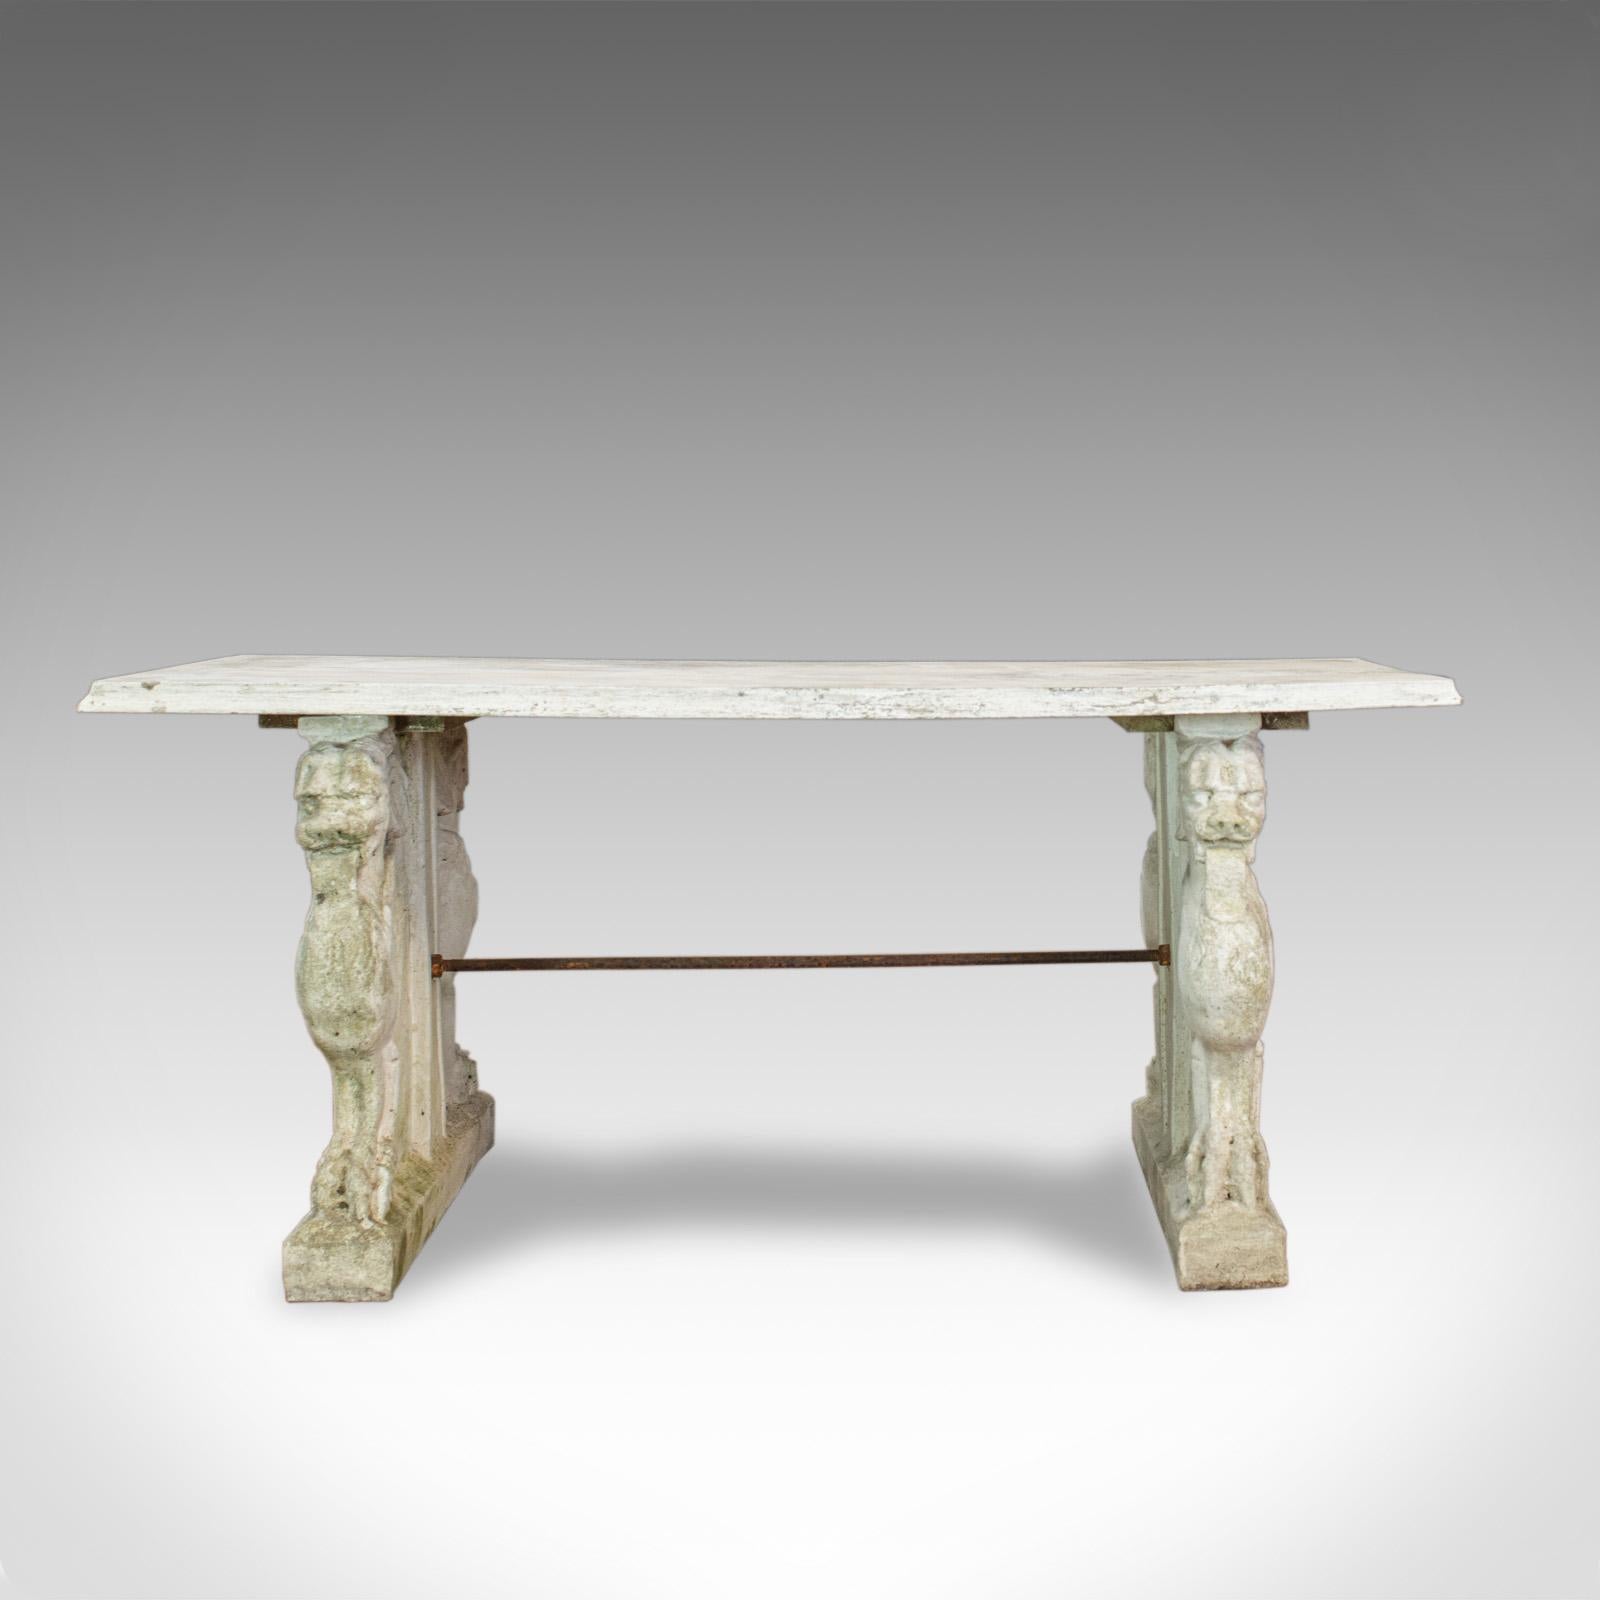 This is a vintage garden table. An Italian, reconstituted stone bench dating to the mid-20th century, circa 1960.

A detailed pedestal table or bench displaying desirable weathering
Stone is in good consistent order throughout
Broad stone top